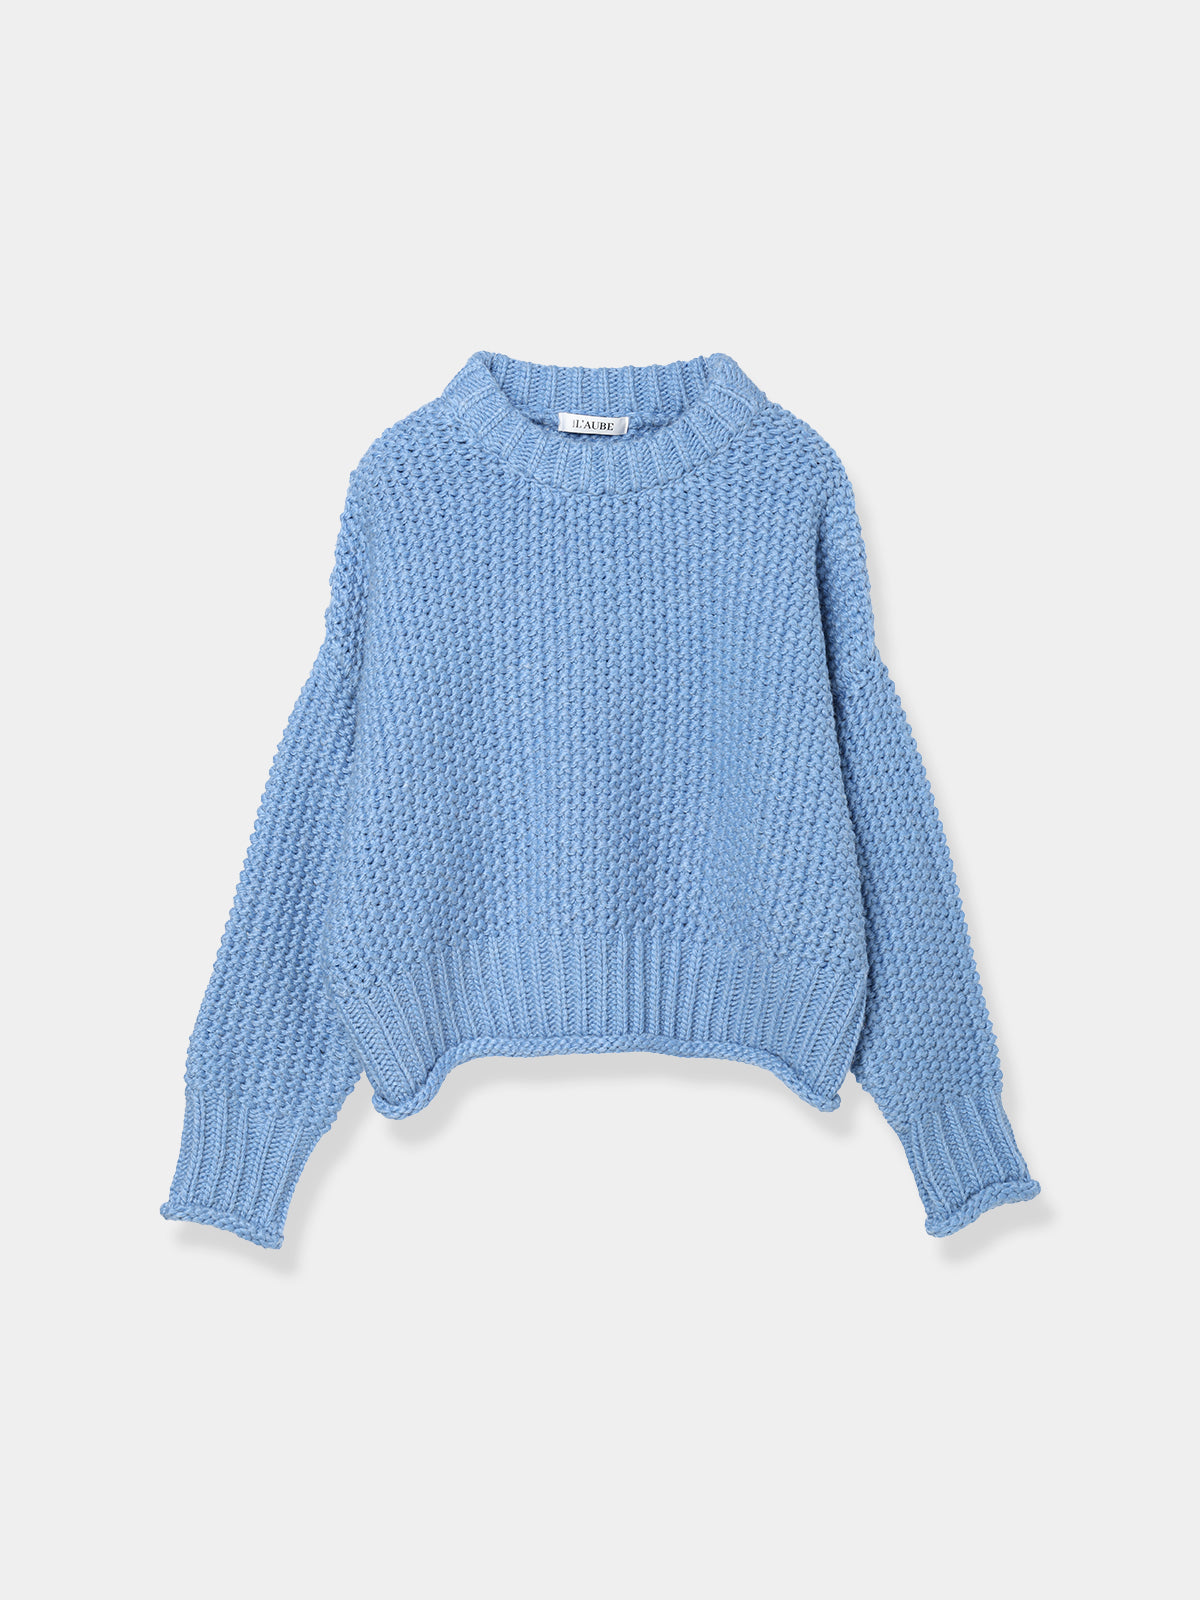 Cropped knit tops